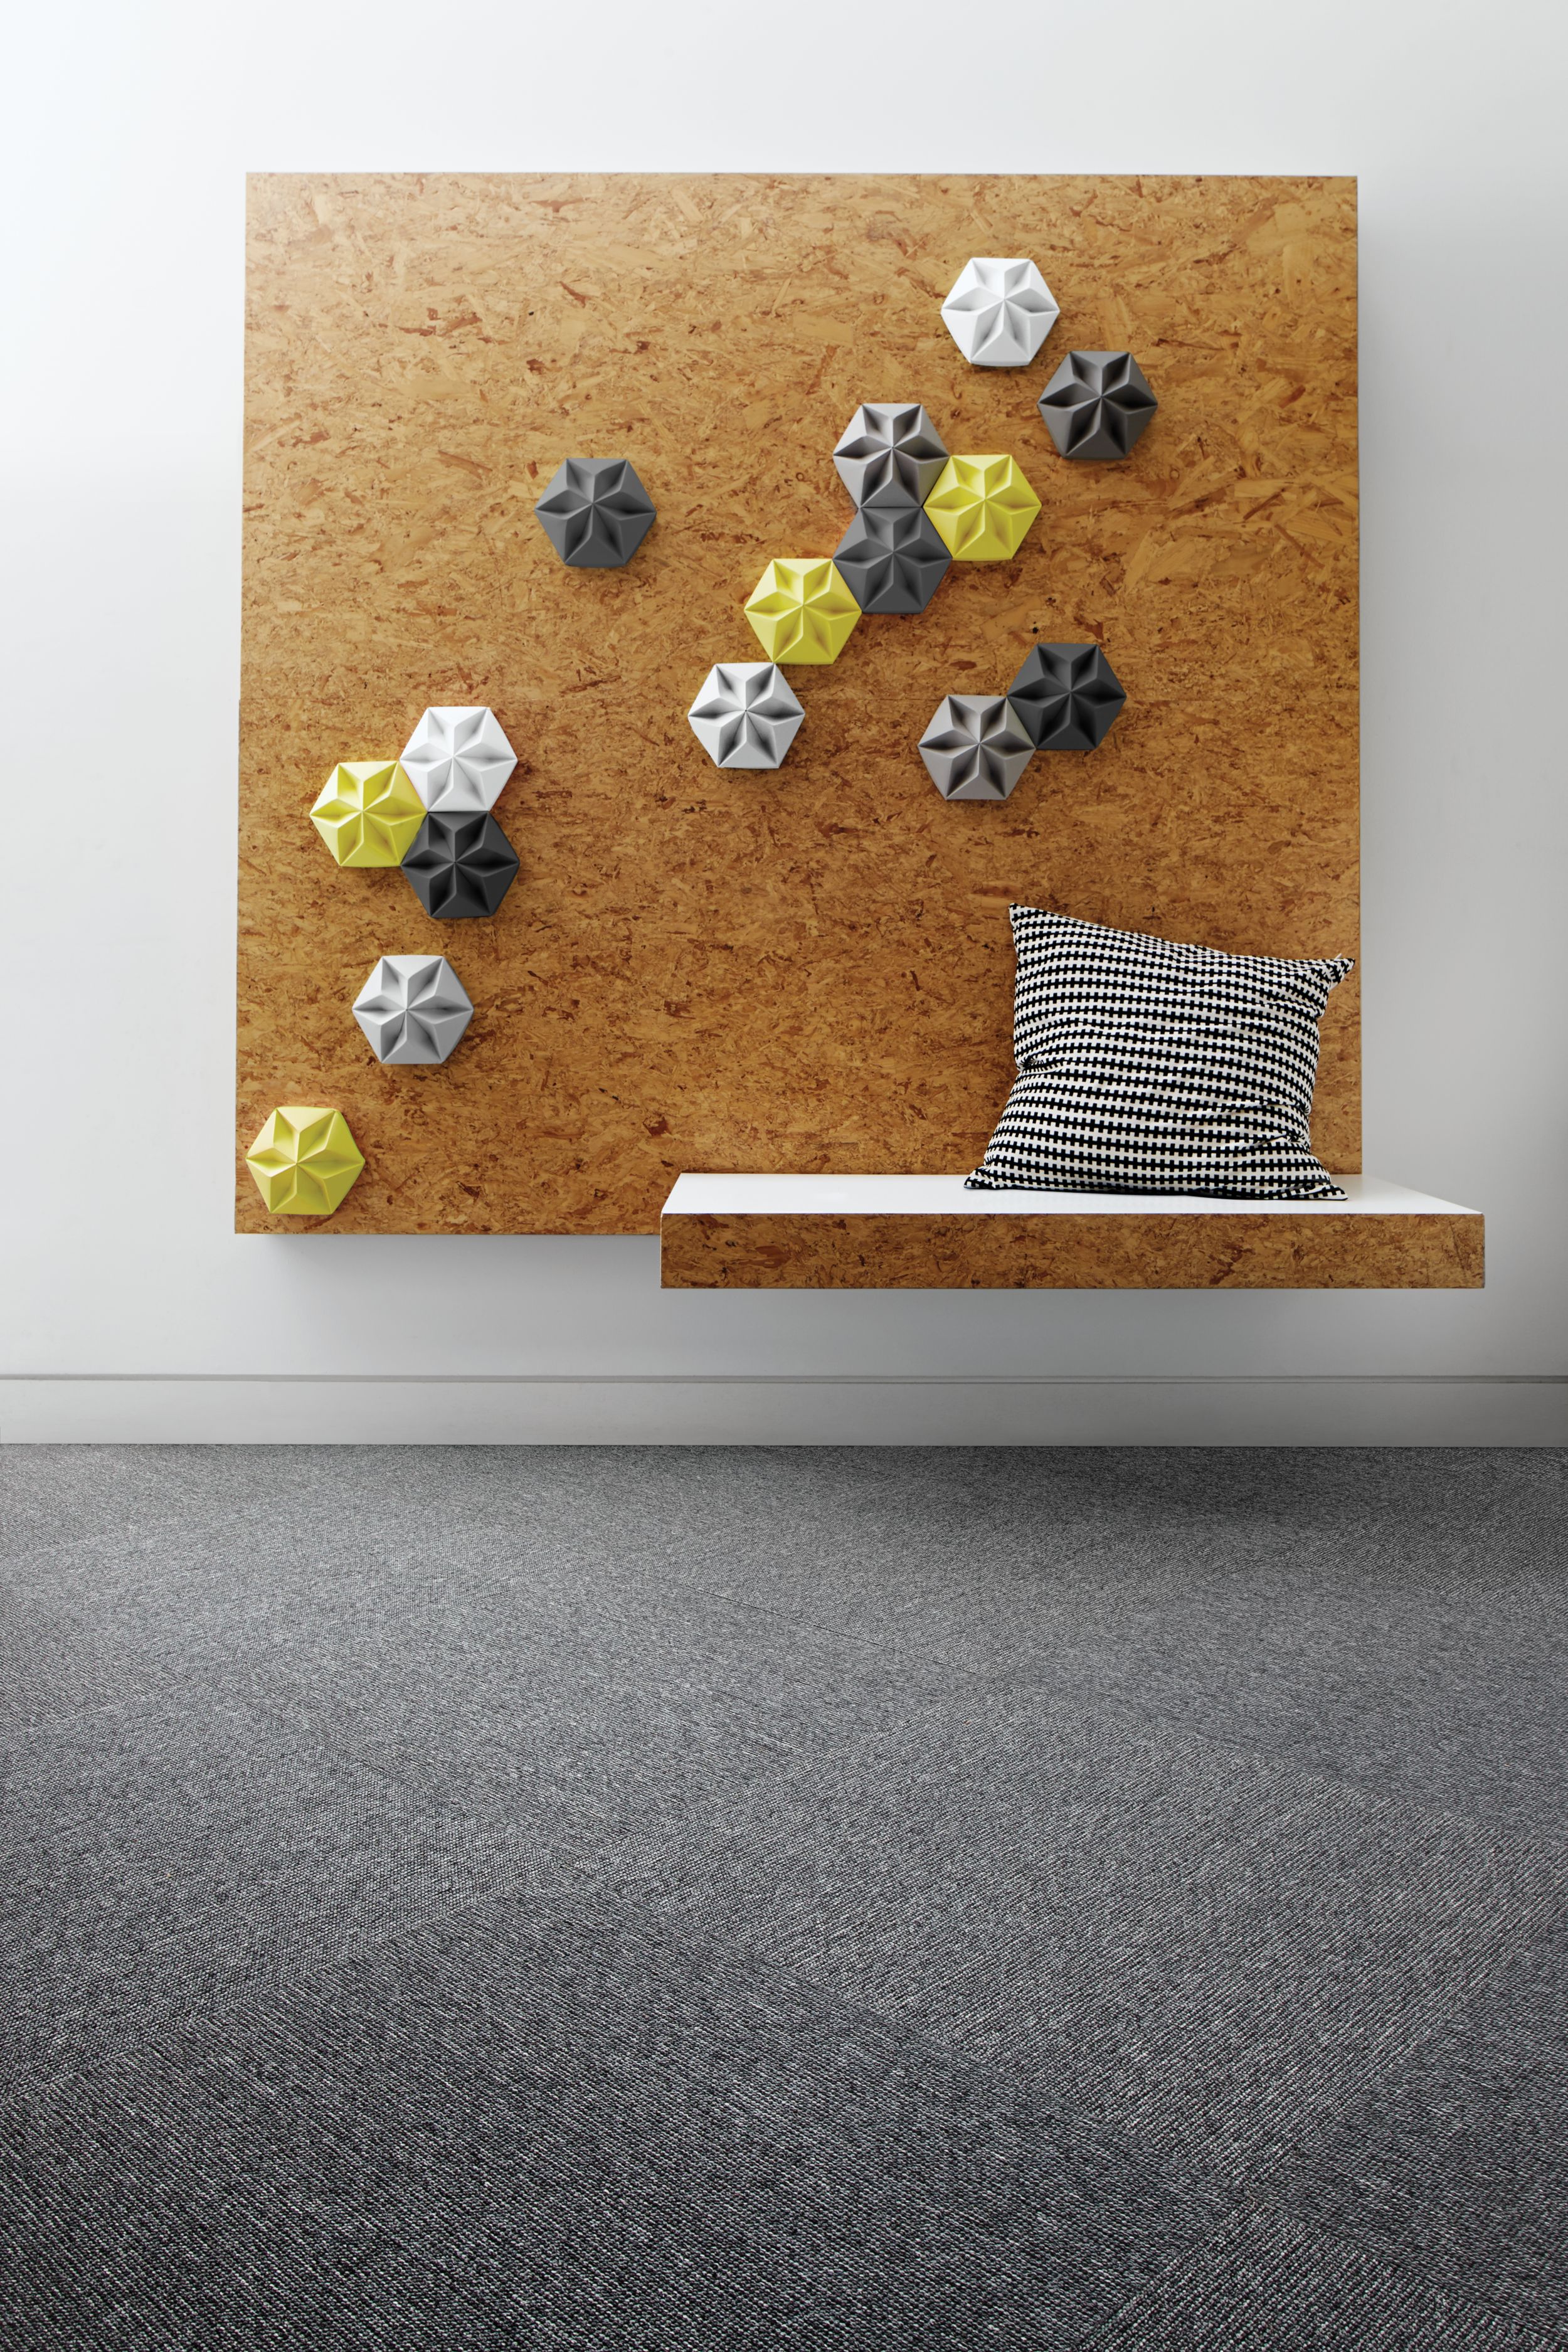  Interface Scandinavian carpet tile in room with suspended shelf and art installation imagen número 5